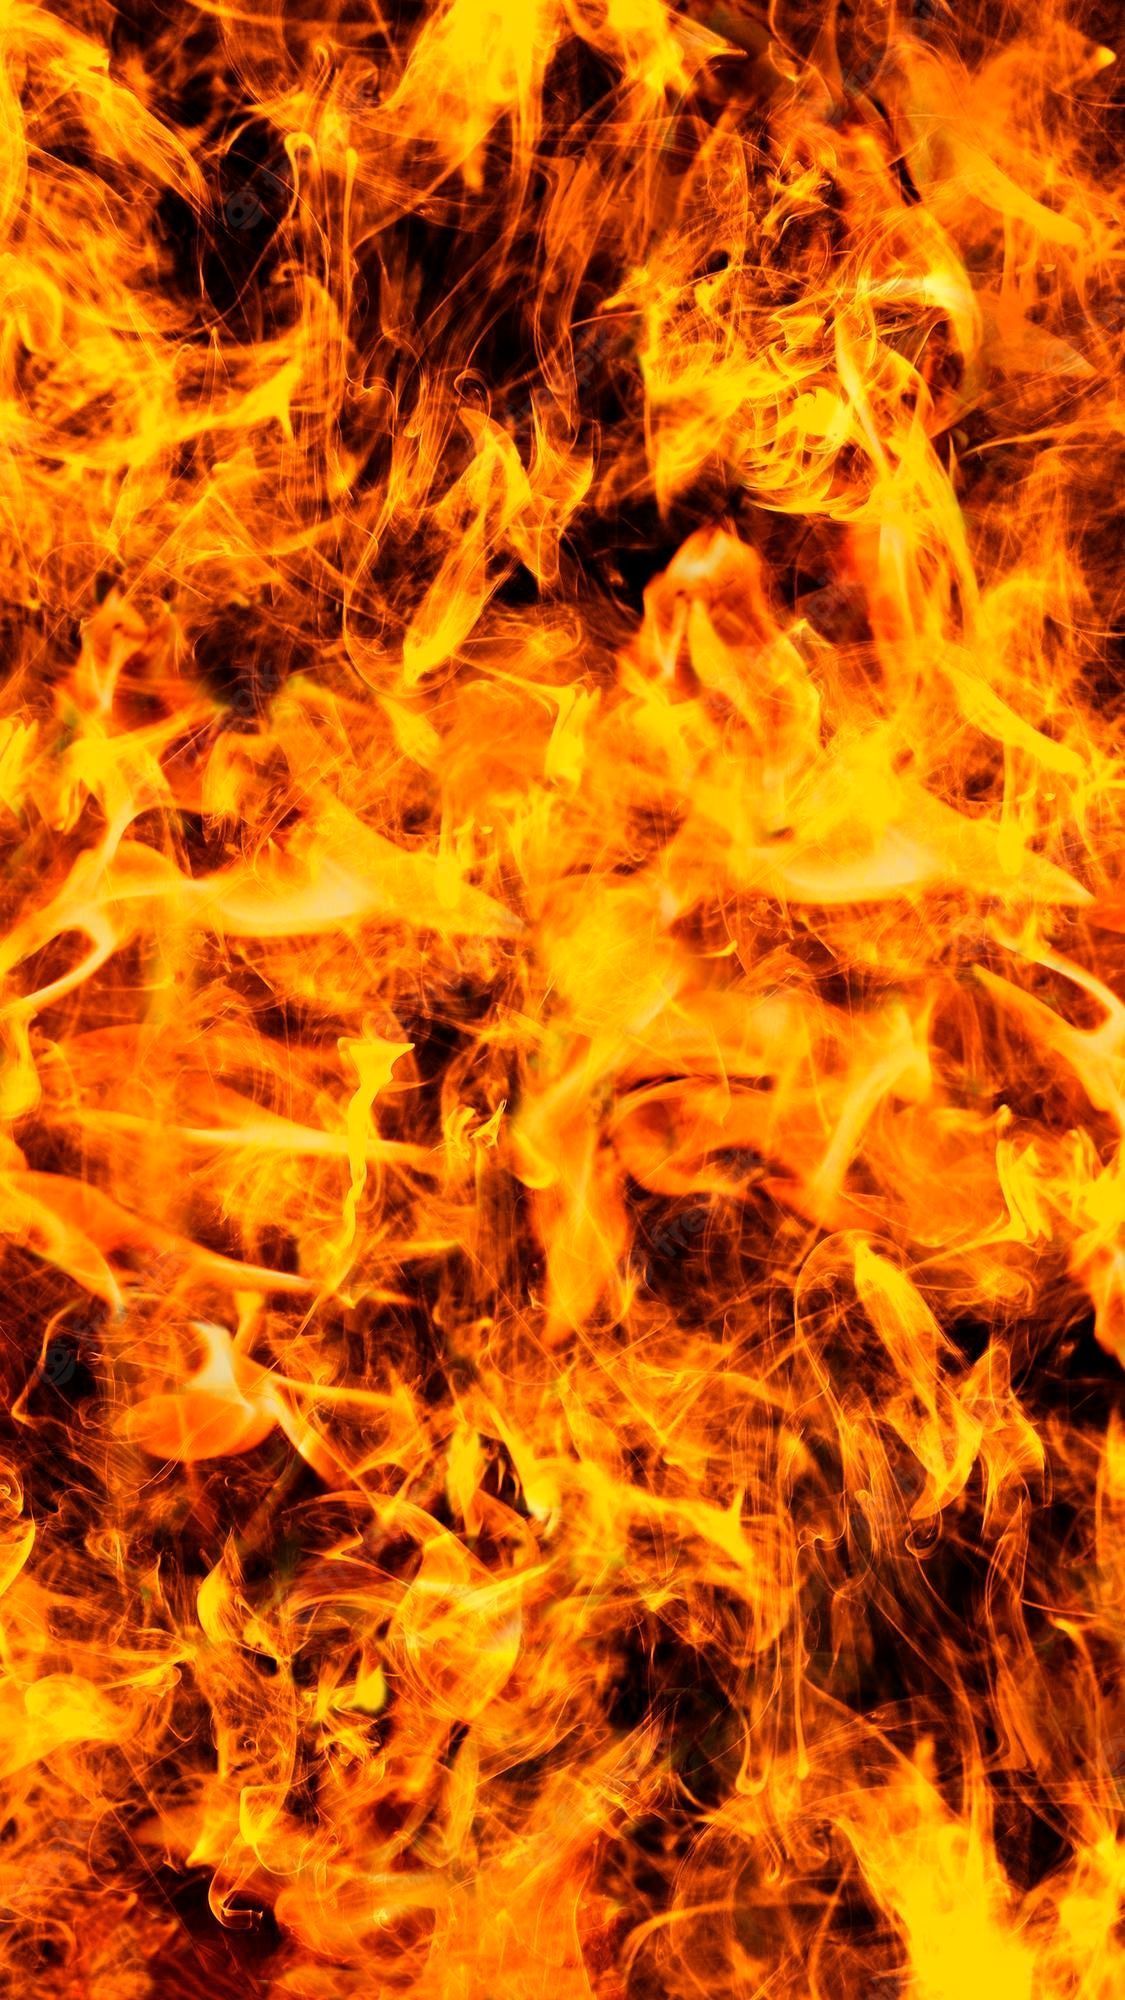 Free Photo. Abstract fire iphone wallpaper, realistic burning flame image